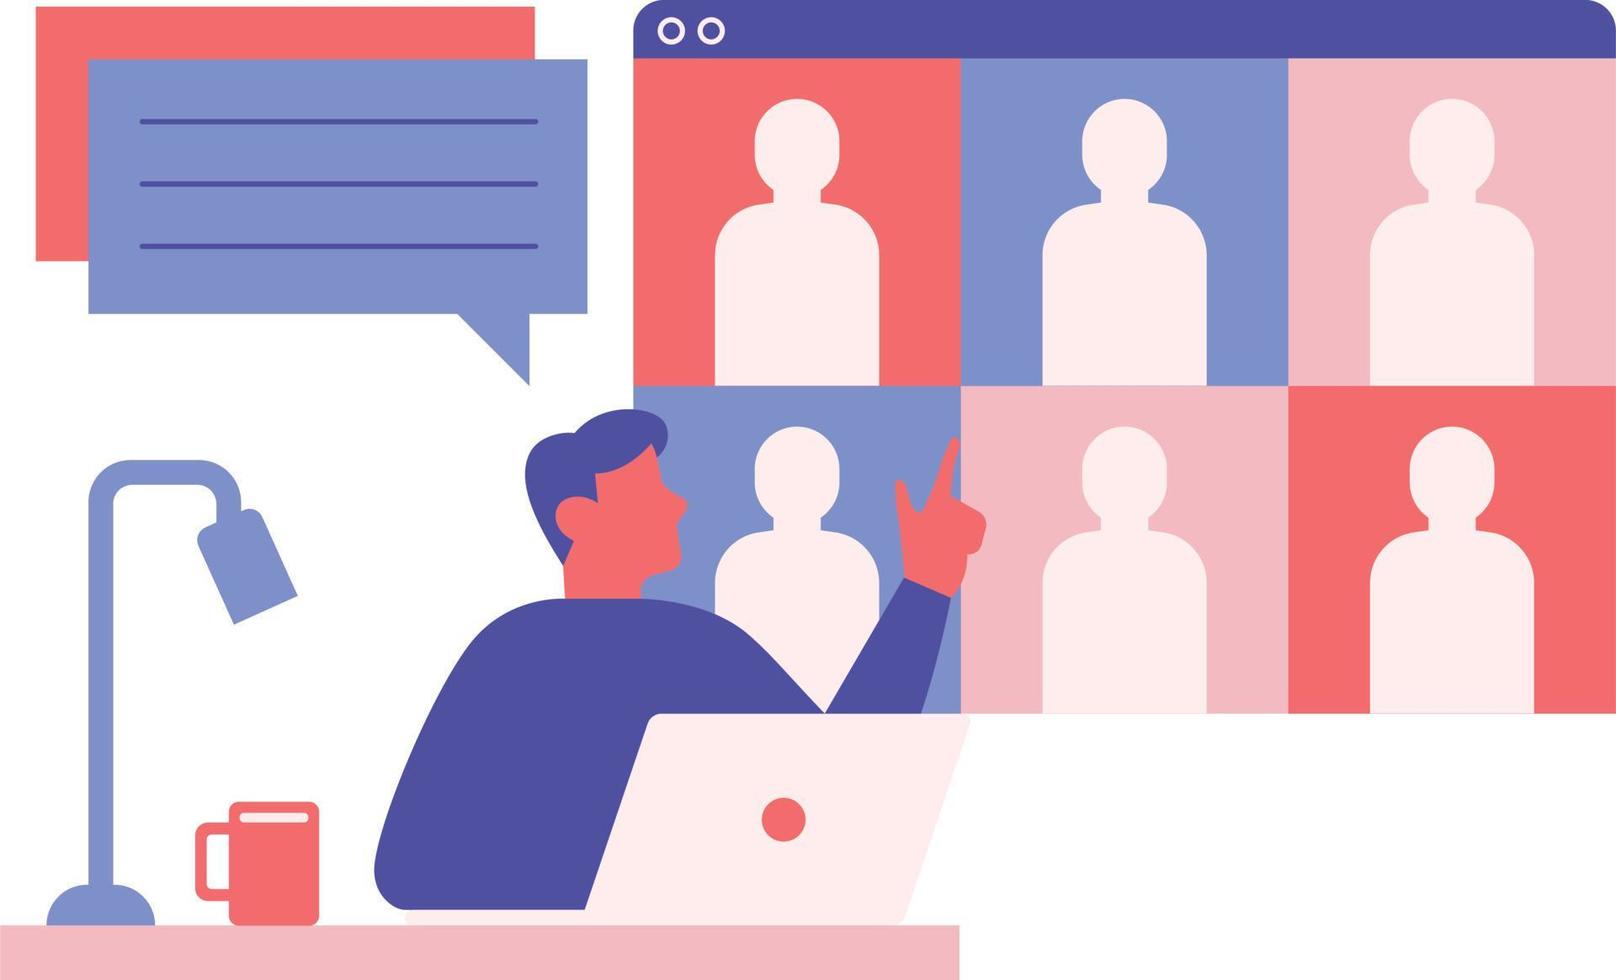 Video conference with group of people. Vector illustration in a flat style